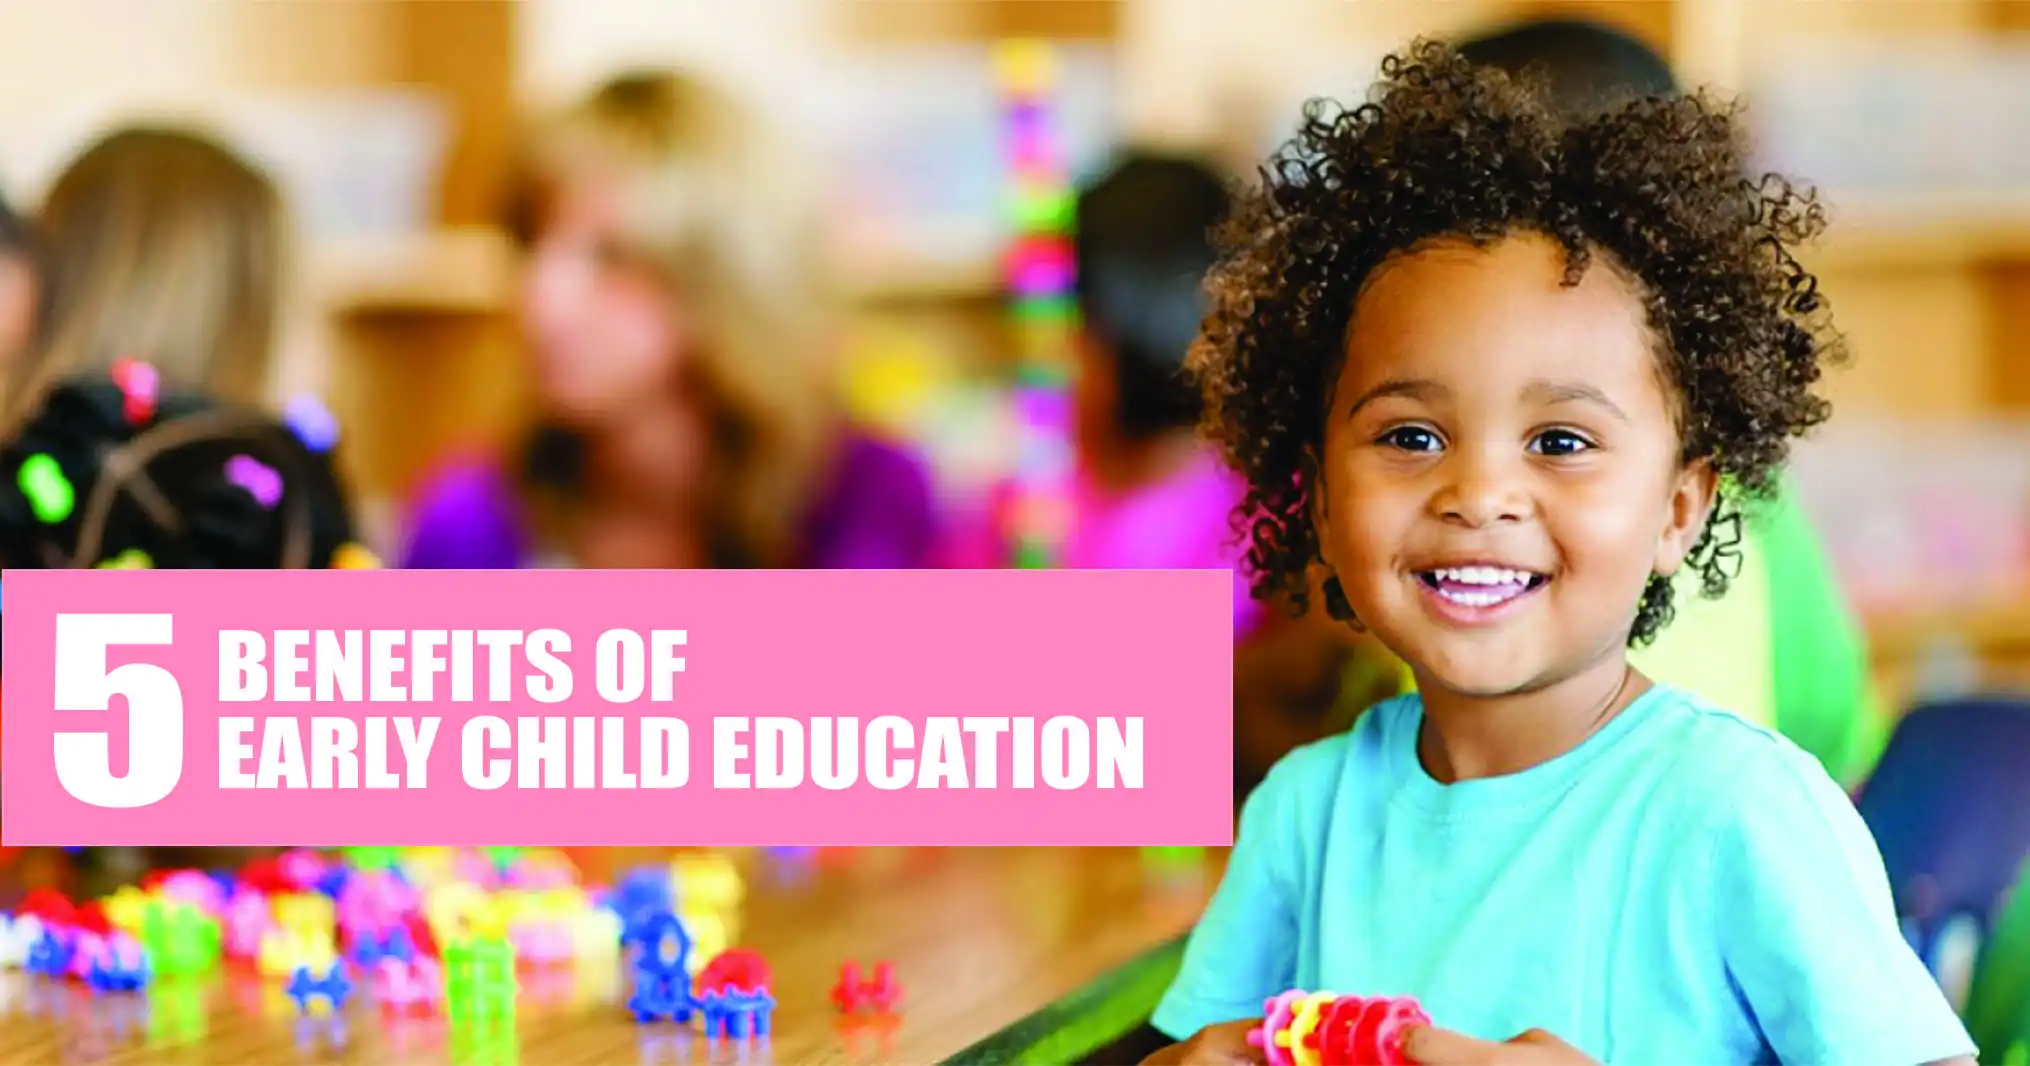 5-BENEFITS-OF-EARLY-CHILD-EDUCATION